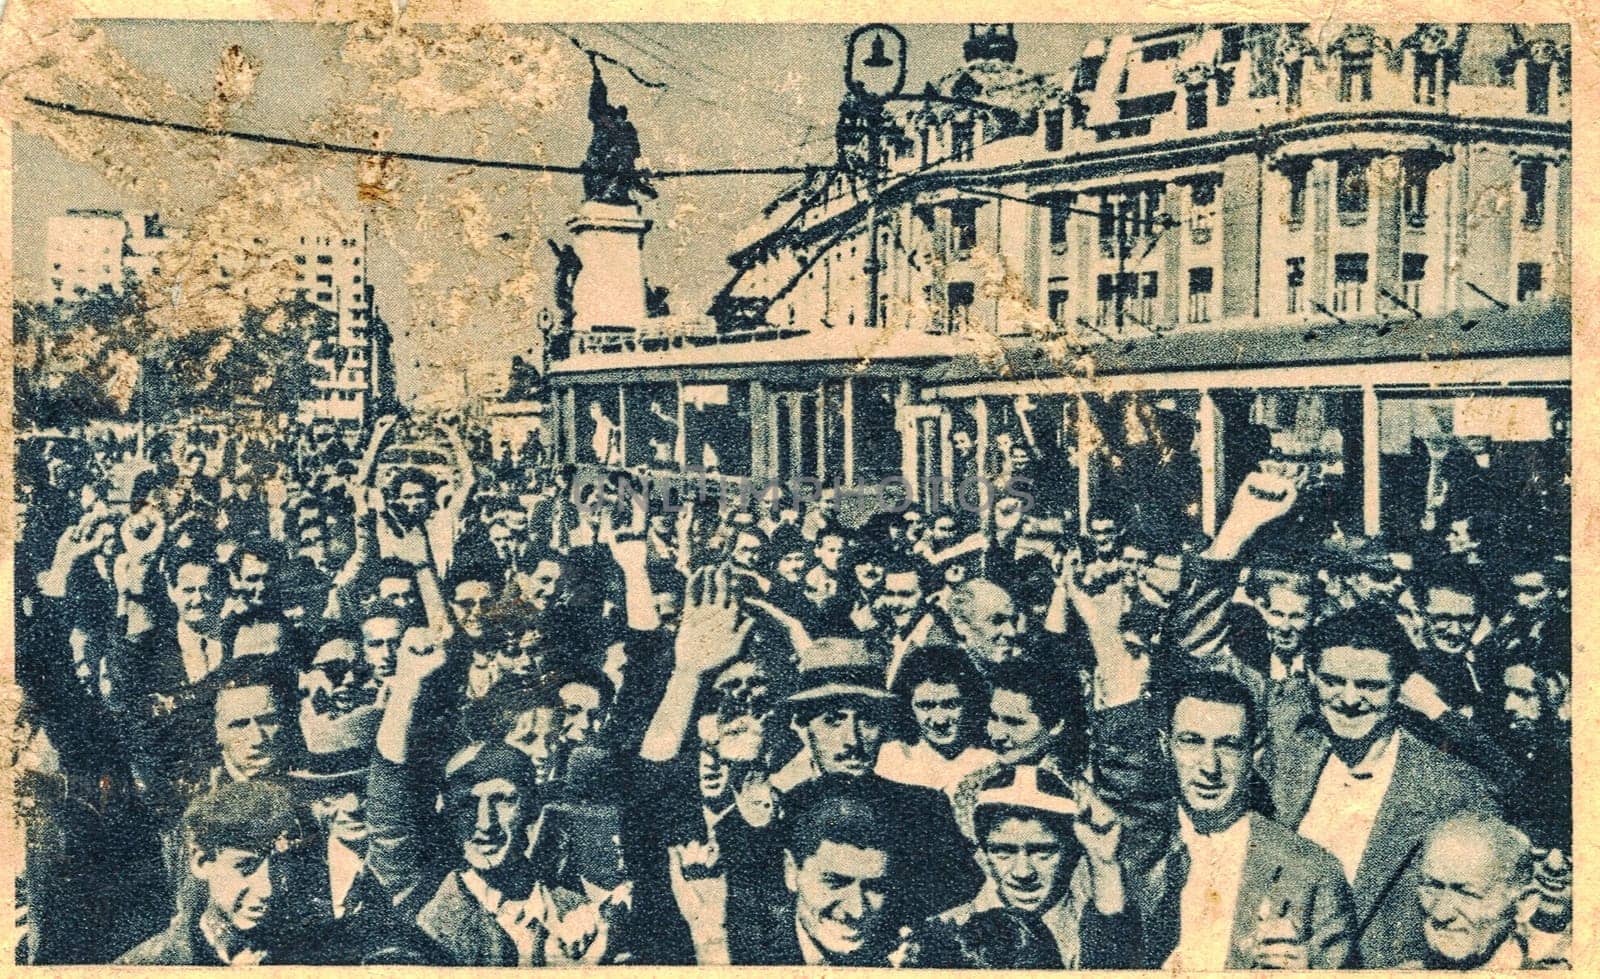 Romanians greet Red Army. The Red Army's advance into Romania, but did not avert a rapid Soviet occupation and capture of about 130,000 Romanian soldiers, who were transported to the Soviet Union, where many perished in prison camps. by roman_nerud